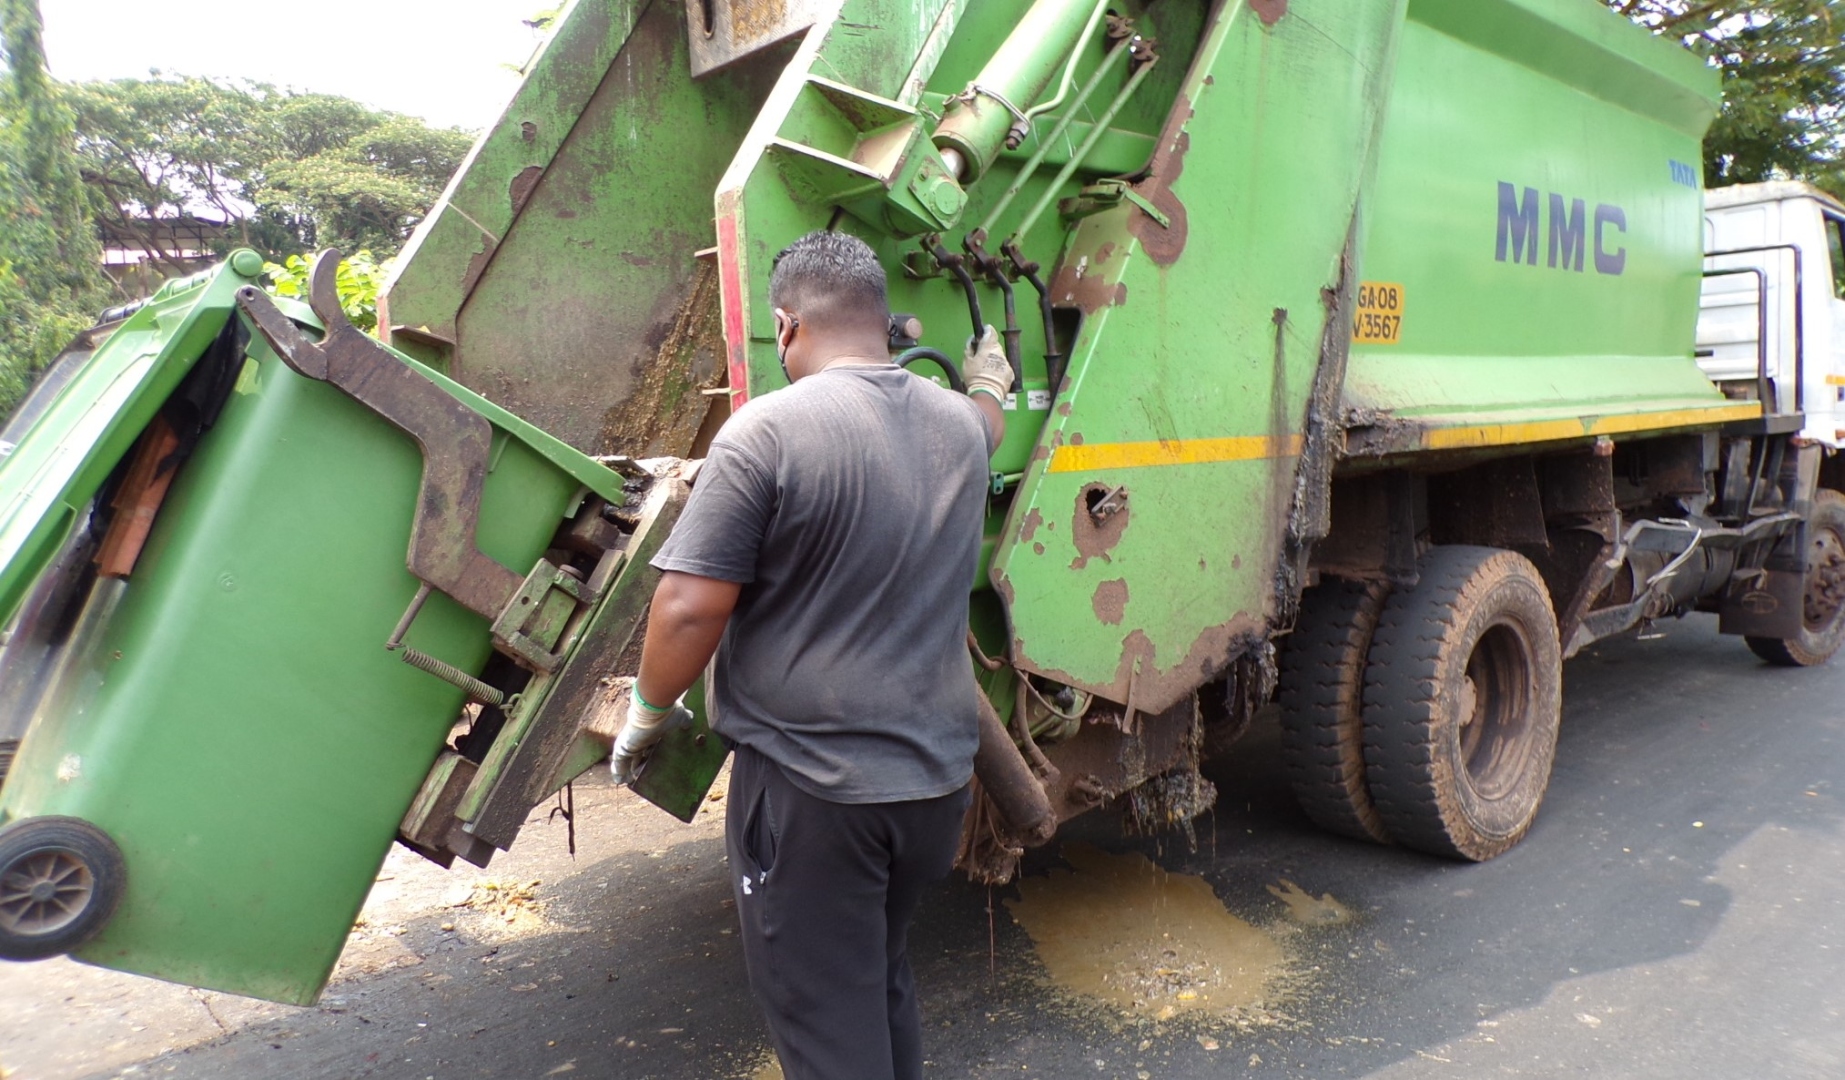 Spillage of slurry from garbage compactors poses risk to motorists